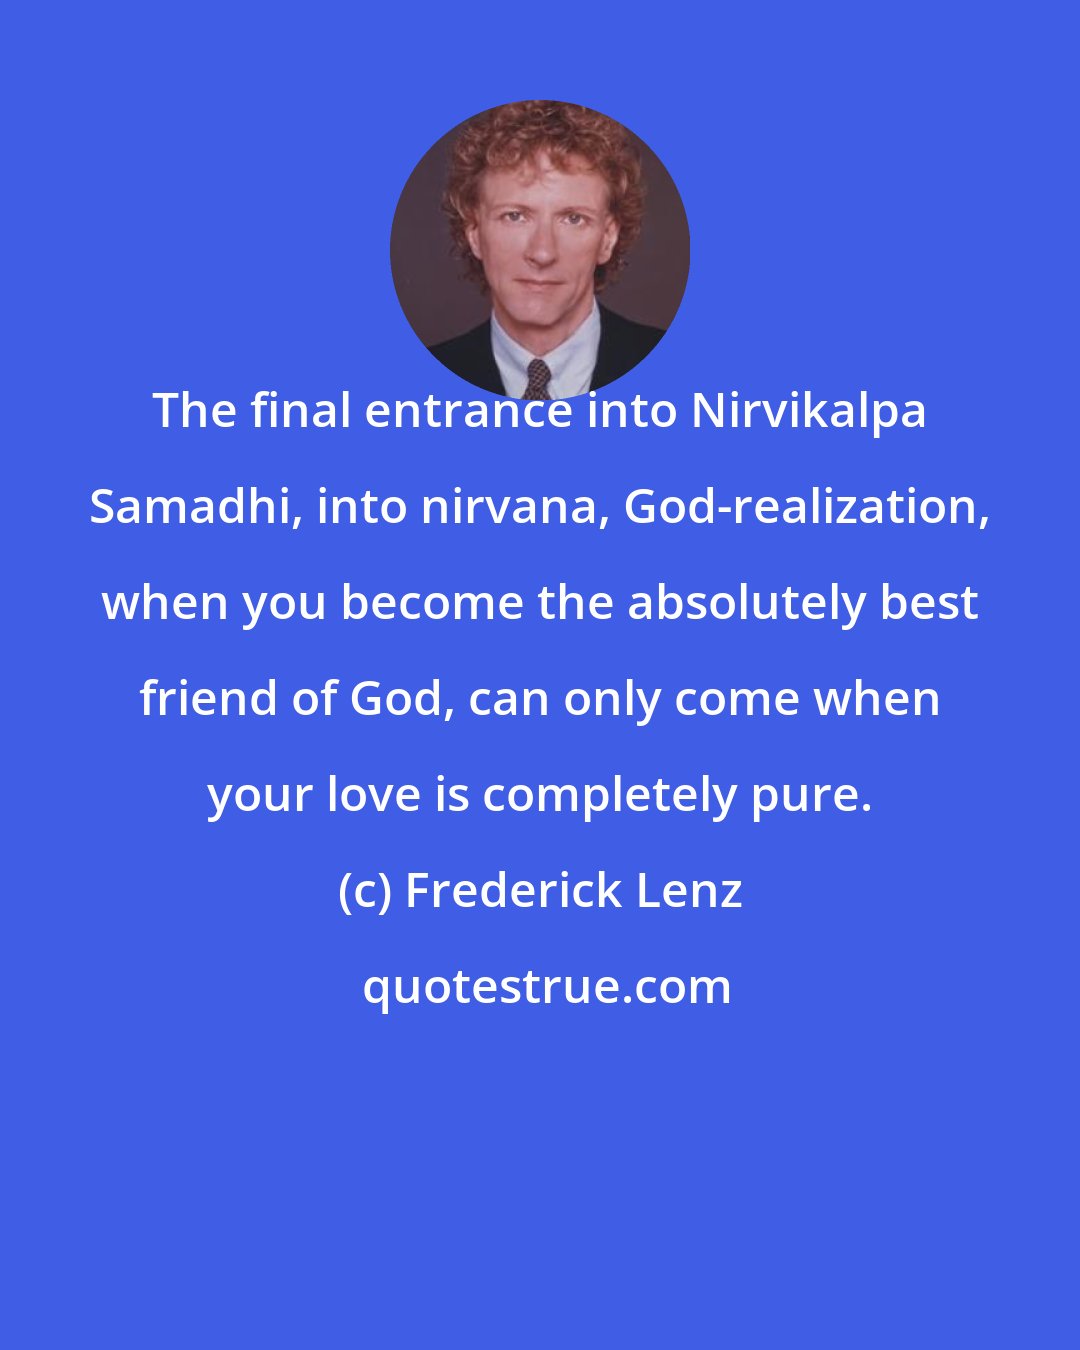 Frederick Lenz: The final entrance into Nirvikalpa Samadhi, into nirvana, God-realization, when you become the absolutely best friend of God, can only come when your love is completely pure.